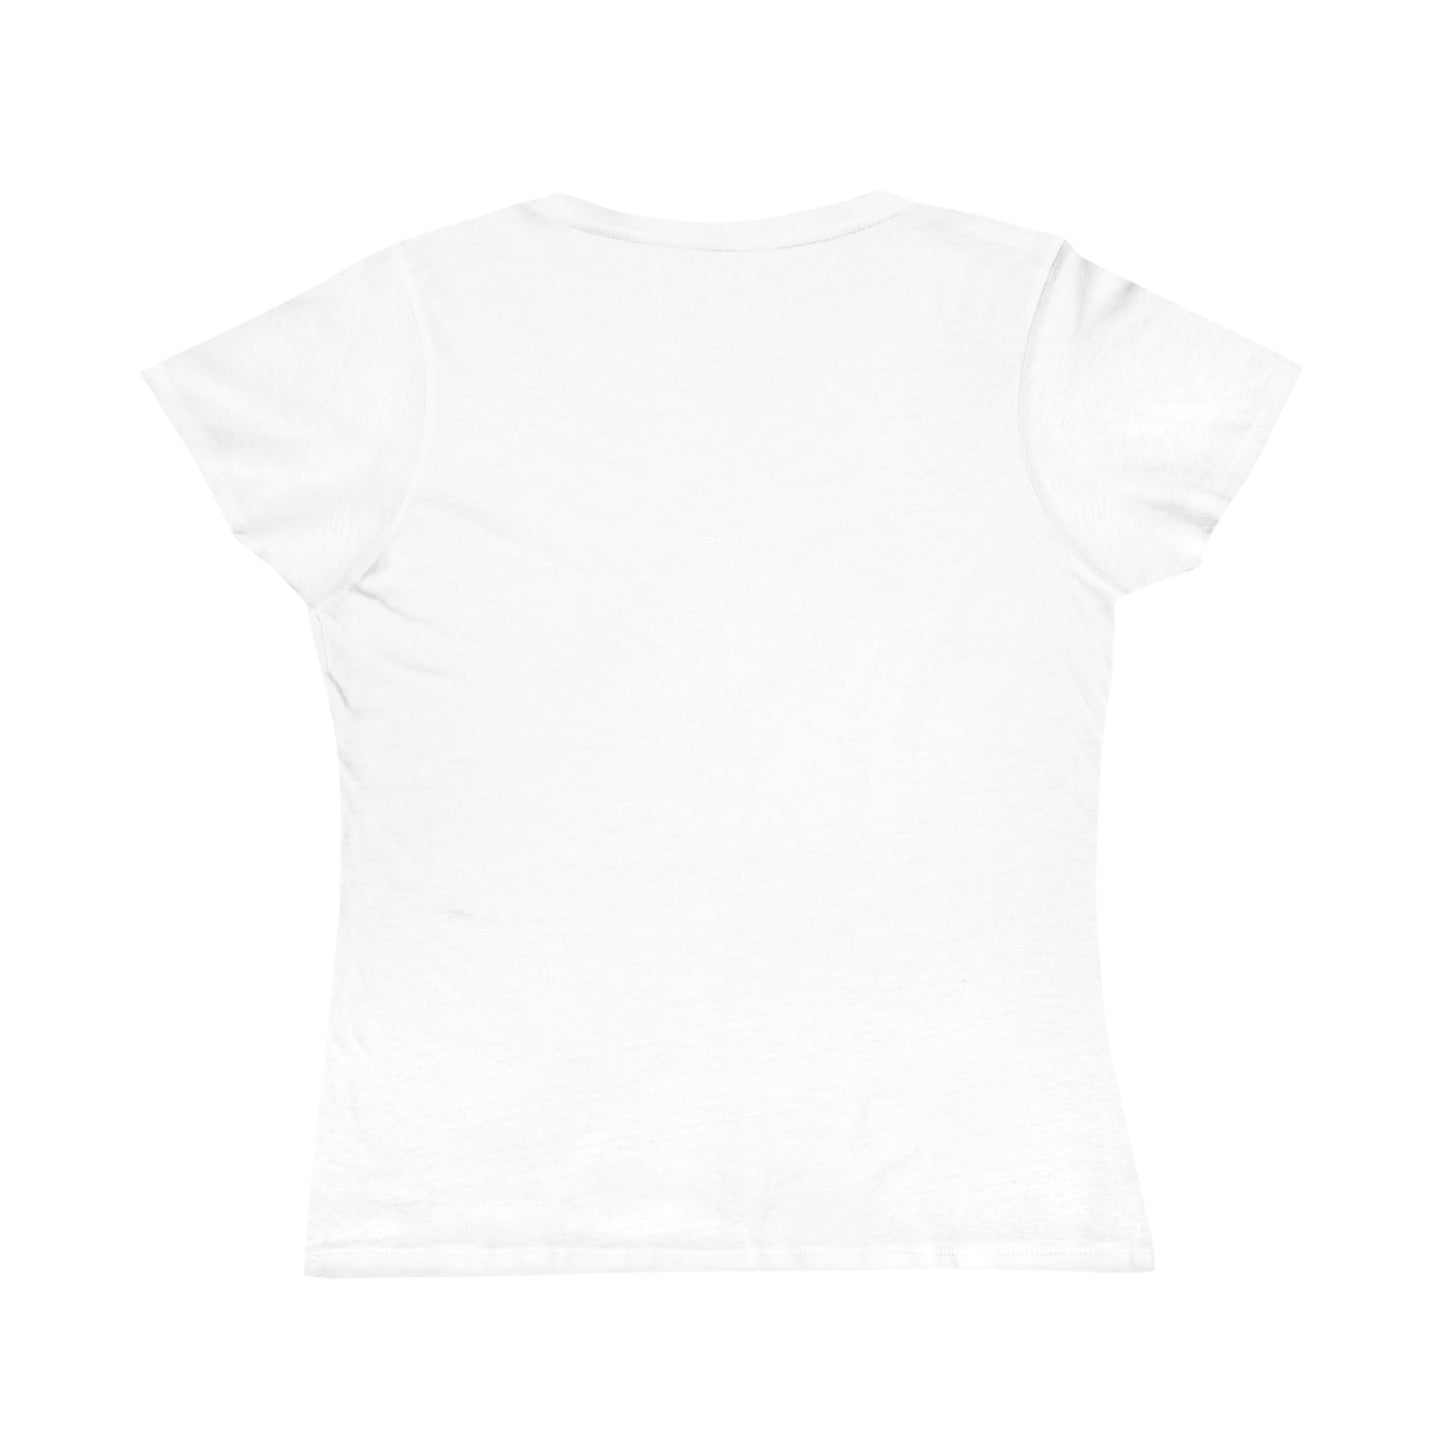 Dress for Change: Eco-Conscious Style with Our "Save the Monarchs" Organic Women's Classic T-Shirt